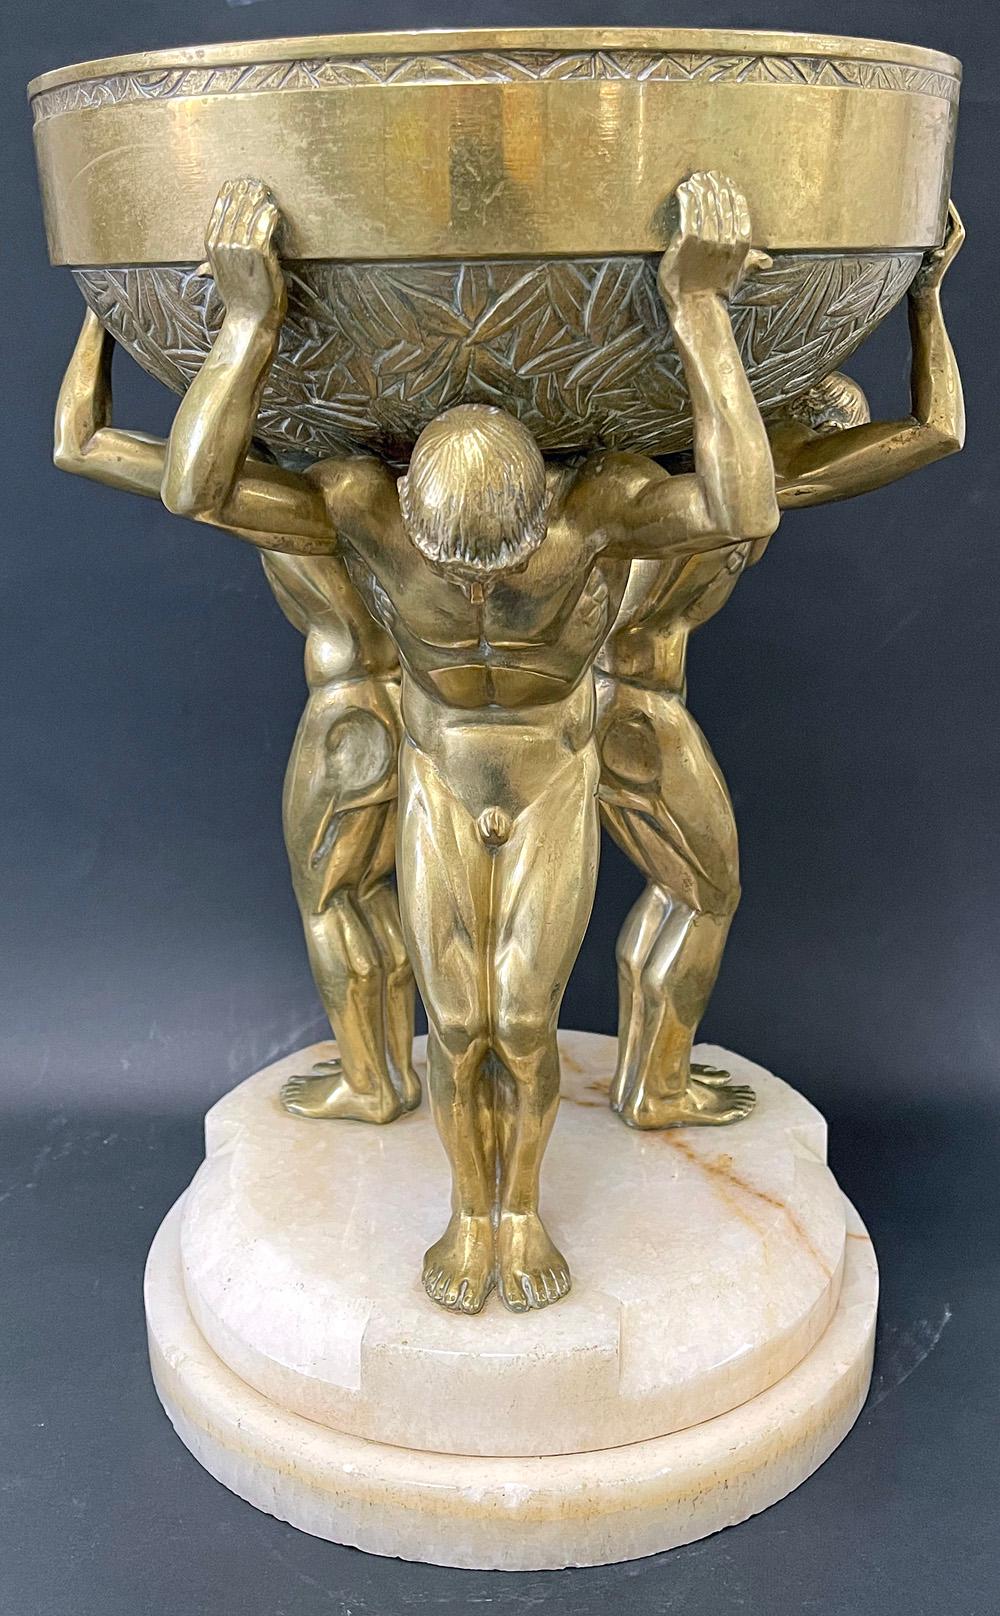 One of the rarest and most spectacular of all the high style Art Deco sculptures made in 1920s France, this gilded centerpiece bowl supported by three nude male figures was created by Maurice Guiraud-Rivière. Originally produced in two or three